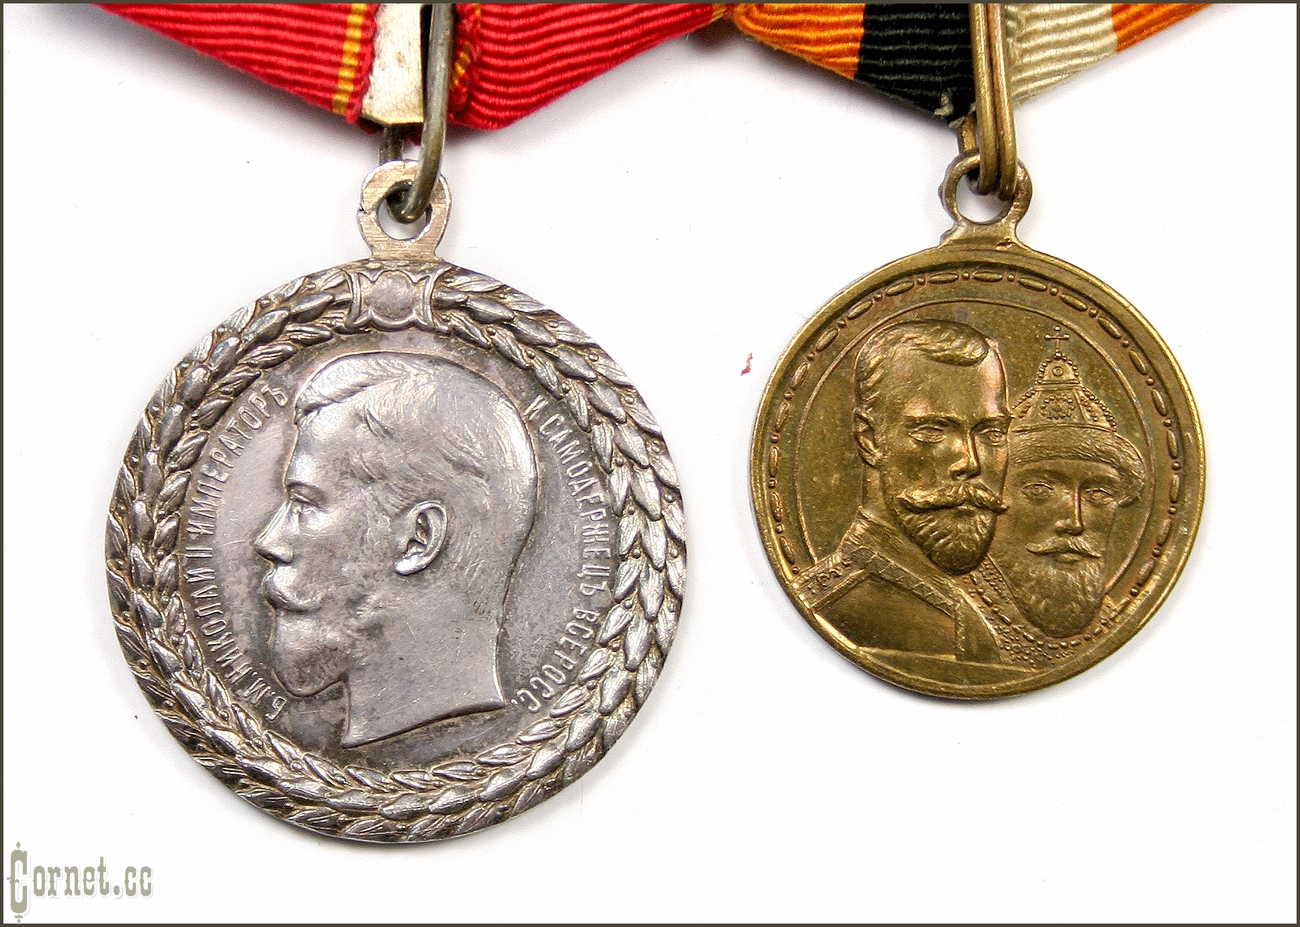 Awards of a policeman of the Russian Empire